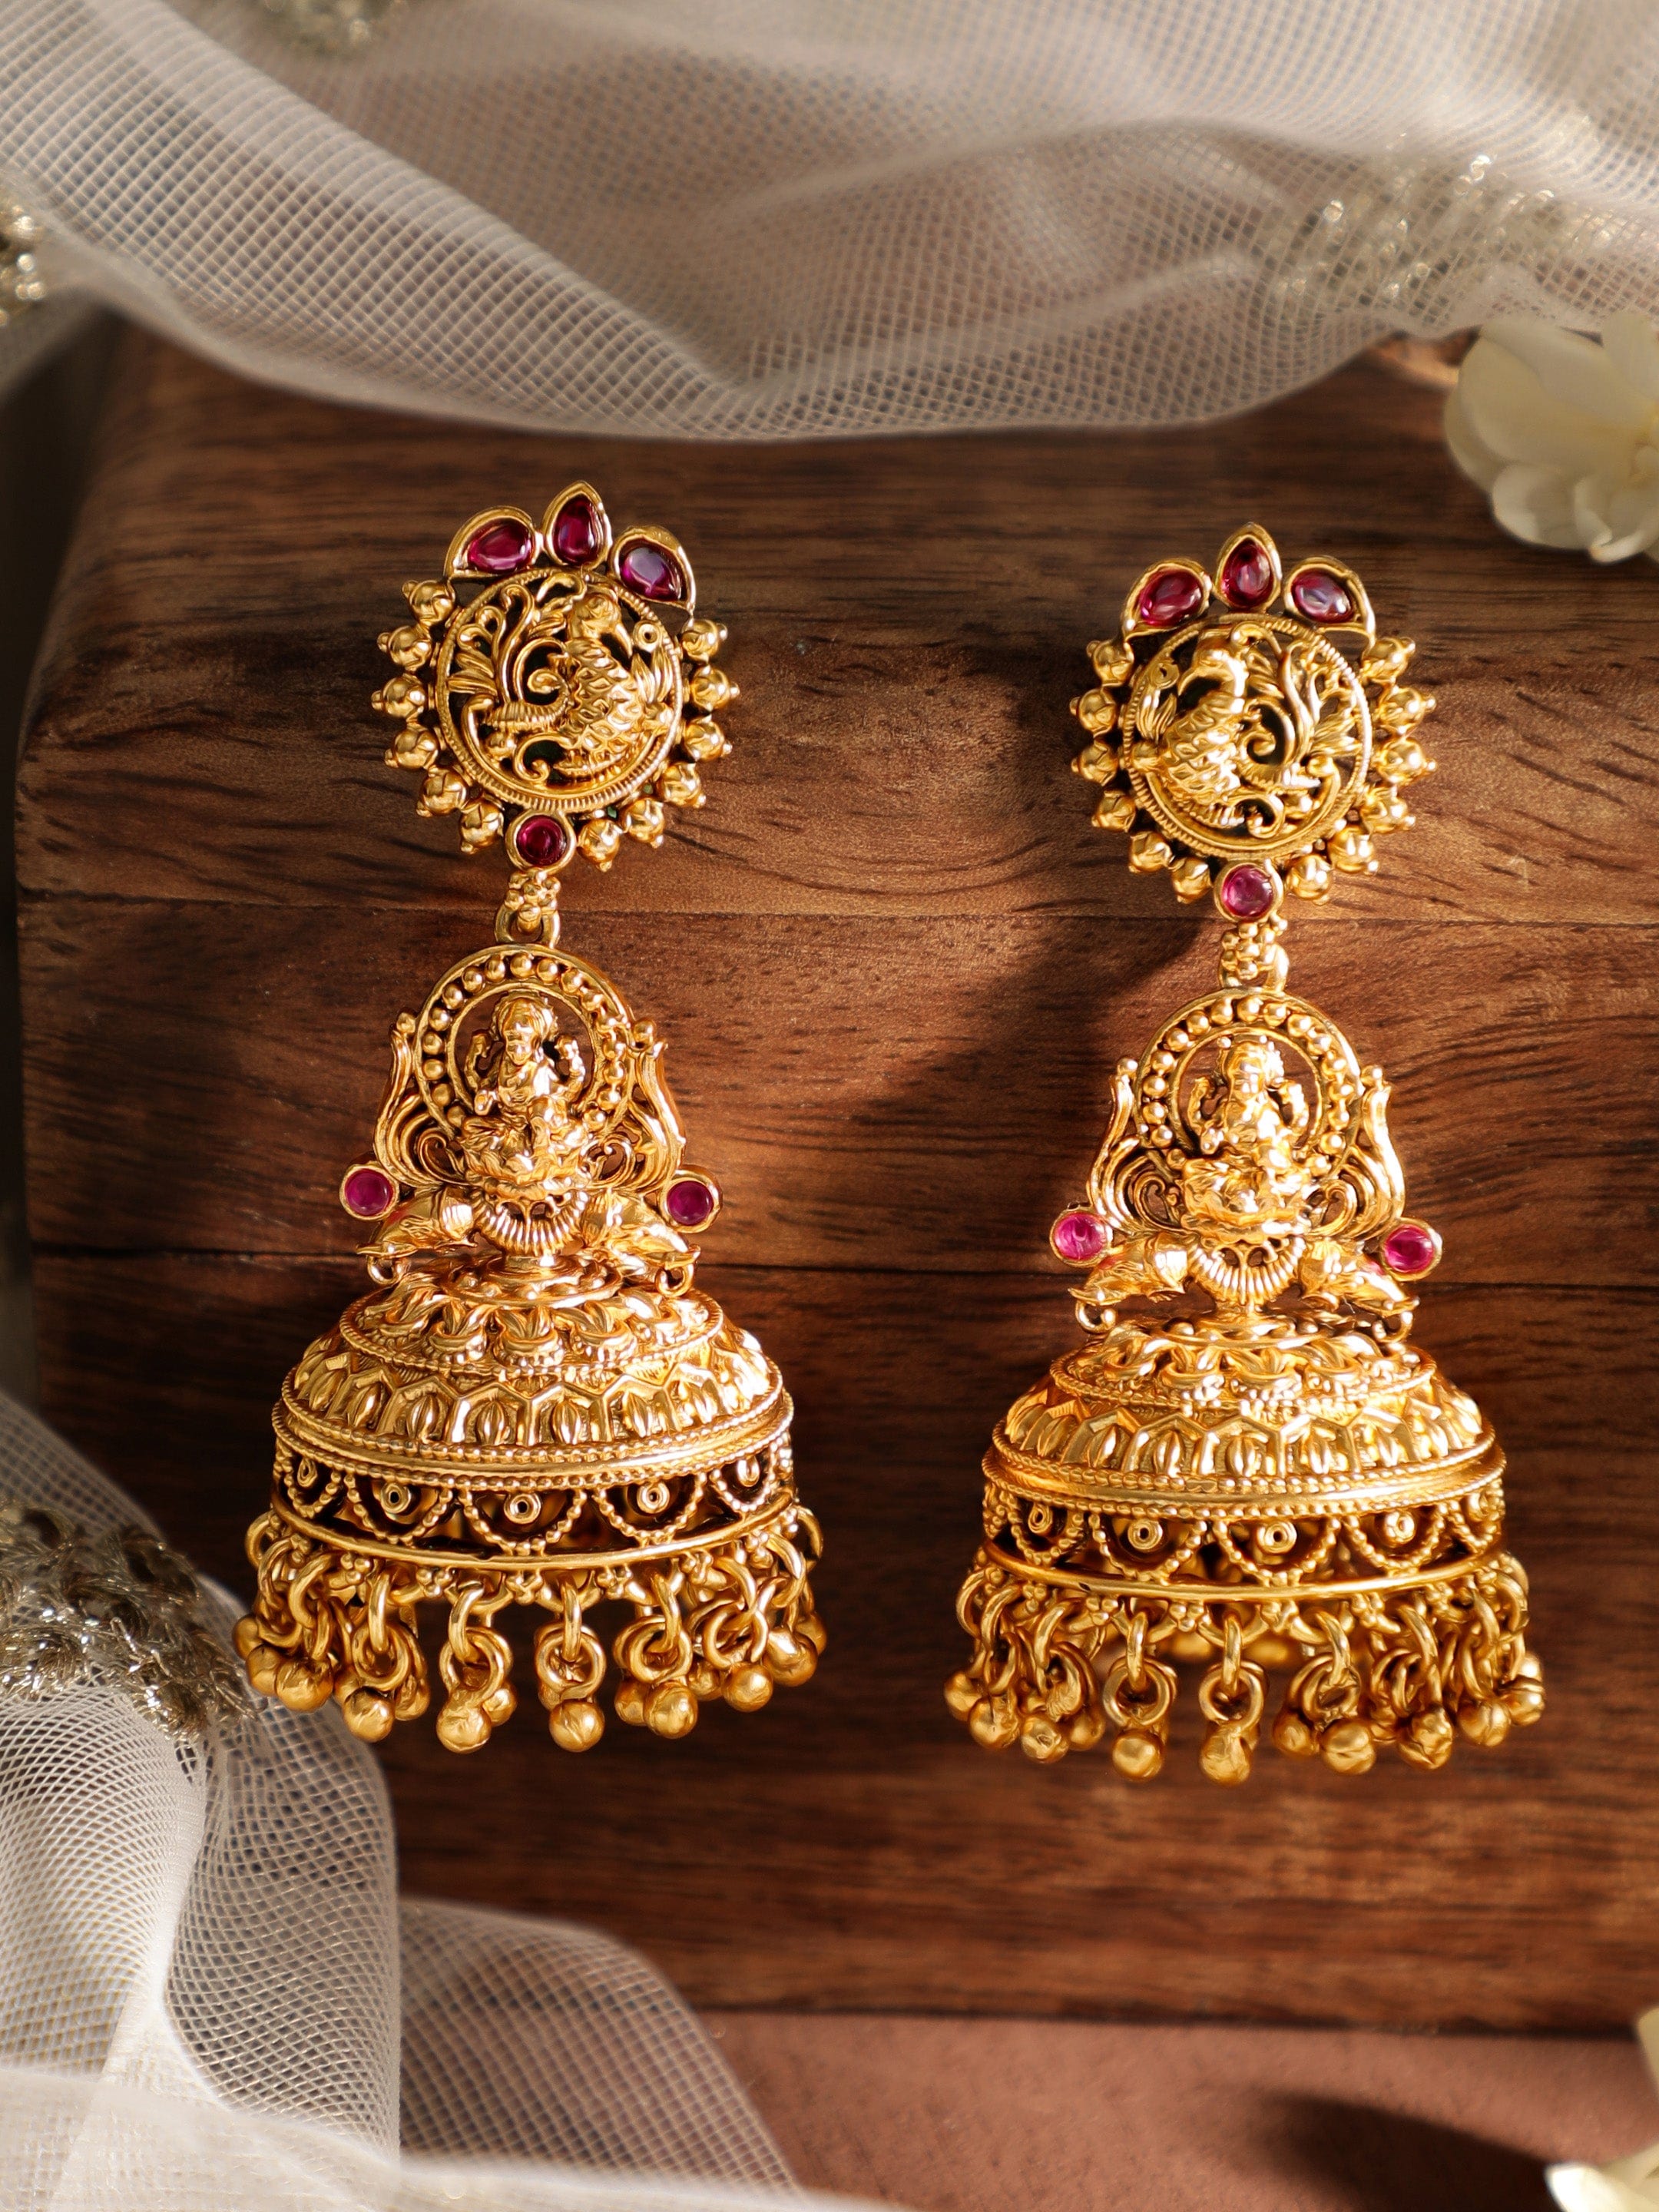 Buy quality 916 gold fancy new design light weight earrings in Ahmedabad